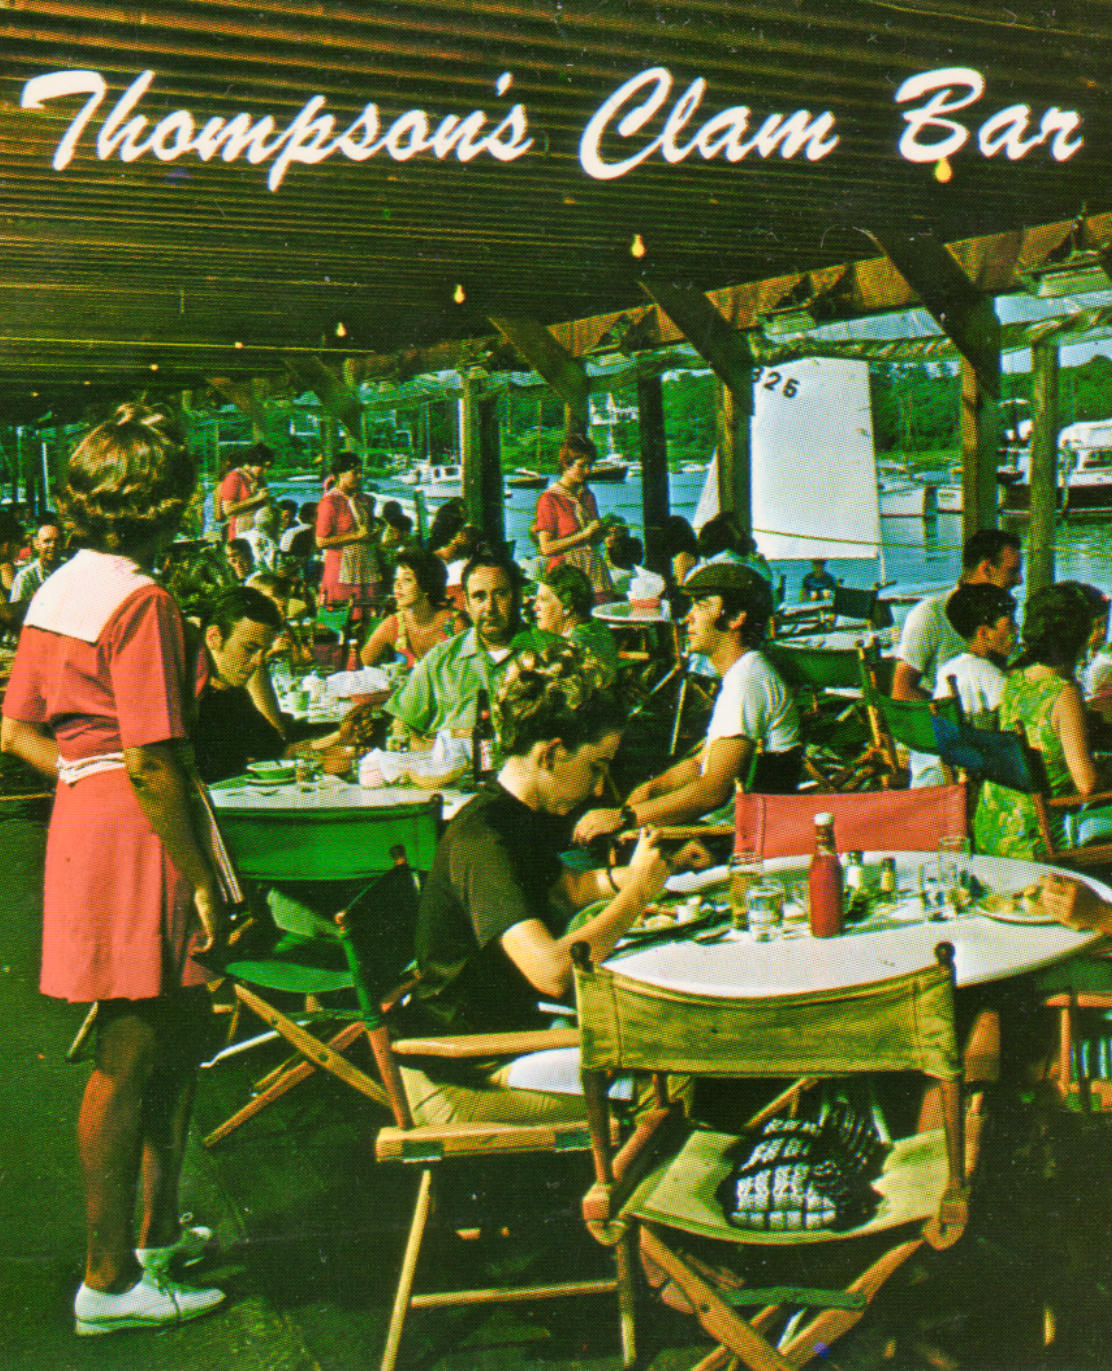 Thompsons Clam Bar Mobile